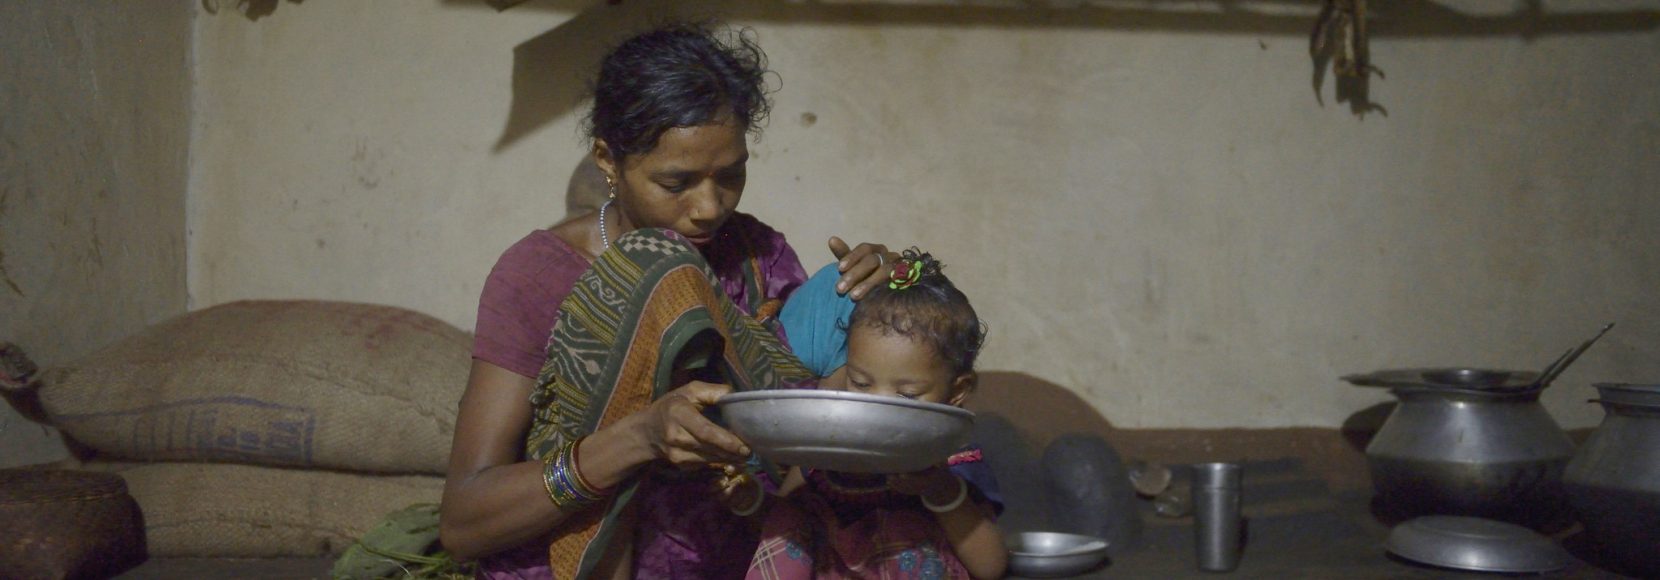 A woman feeds her daughter in the Rayagada district of Odisha, India. Photo Credit- Rohit Jain